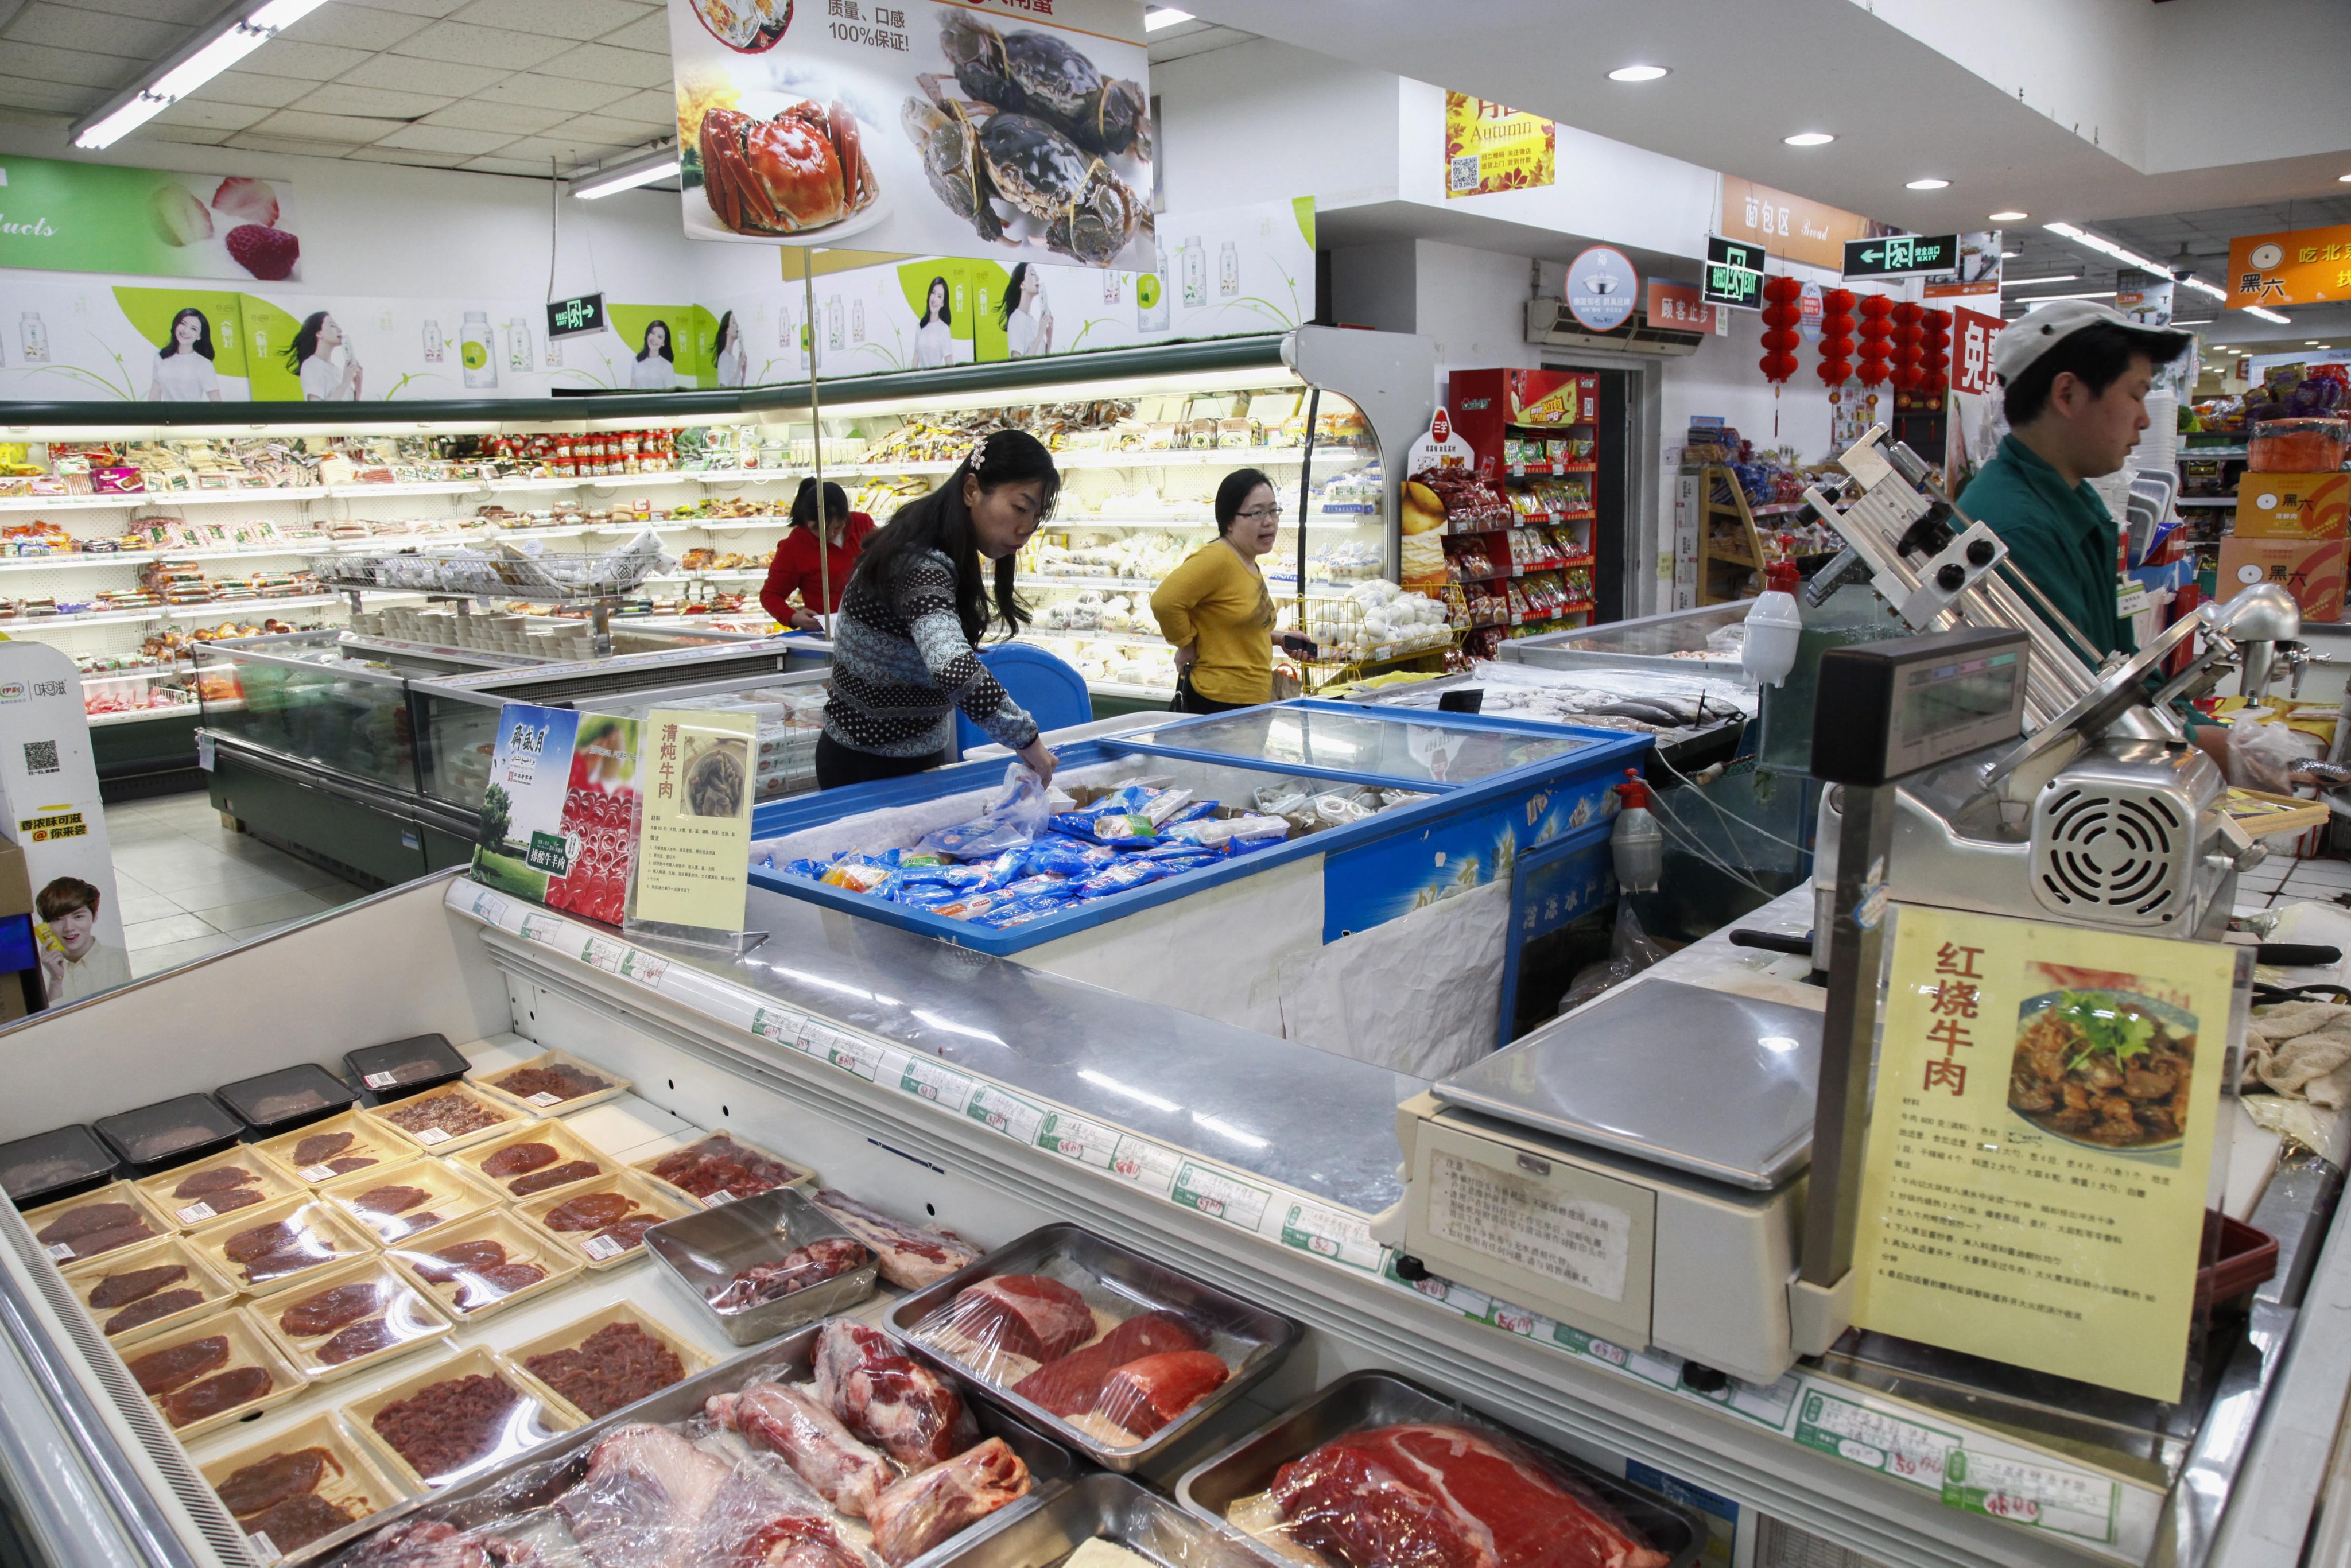 epa04976987 Customers look at meat products at a supermarket in Beijing, China, 14 October 2015. China's consumer price index was up 1.6 percent from a year ago in September, according to government statistics released on 14 October. China has set an annual inflation target at about 3 percent. EPA/ROLEX DELA PENA